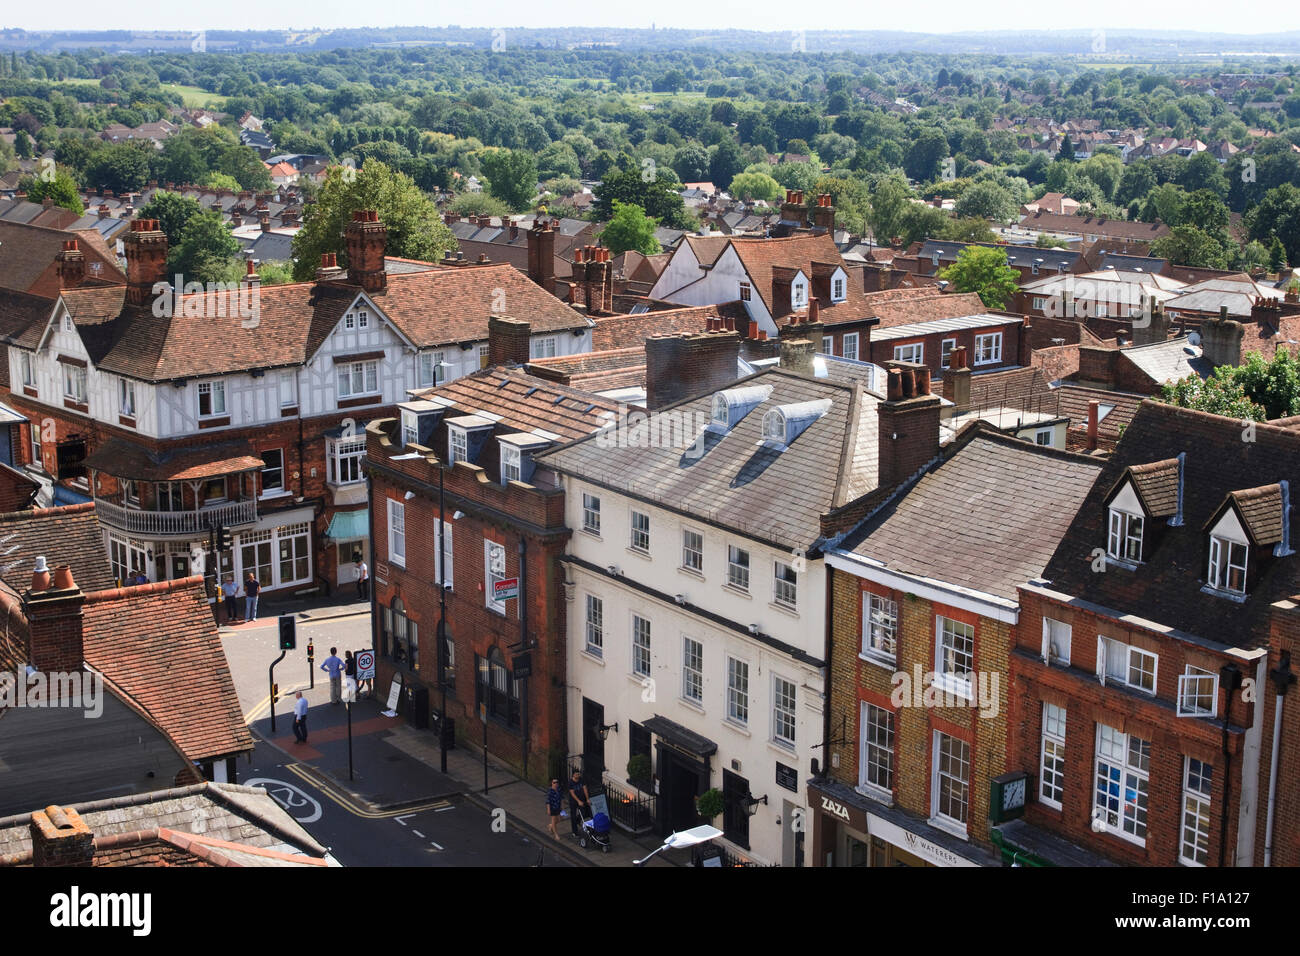 The view from The Clock Tower in St Albans looking down the High Street towards Holywell Hill. Stock Photo